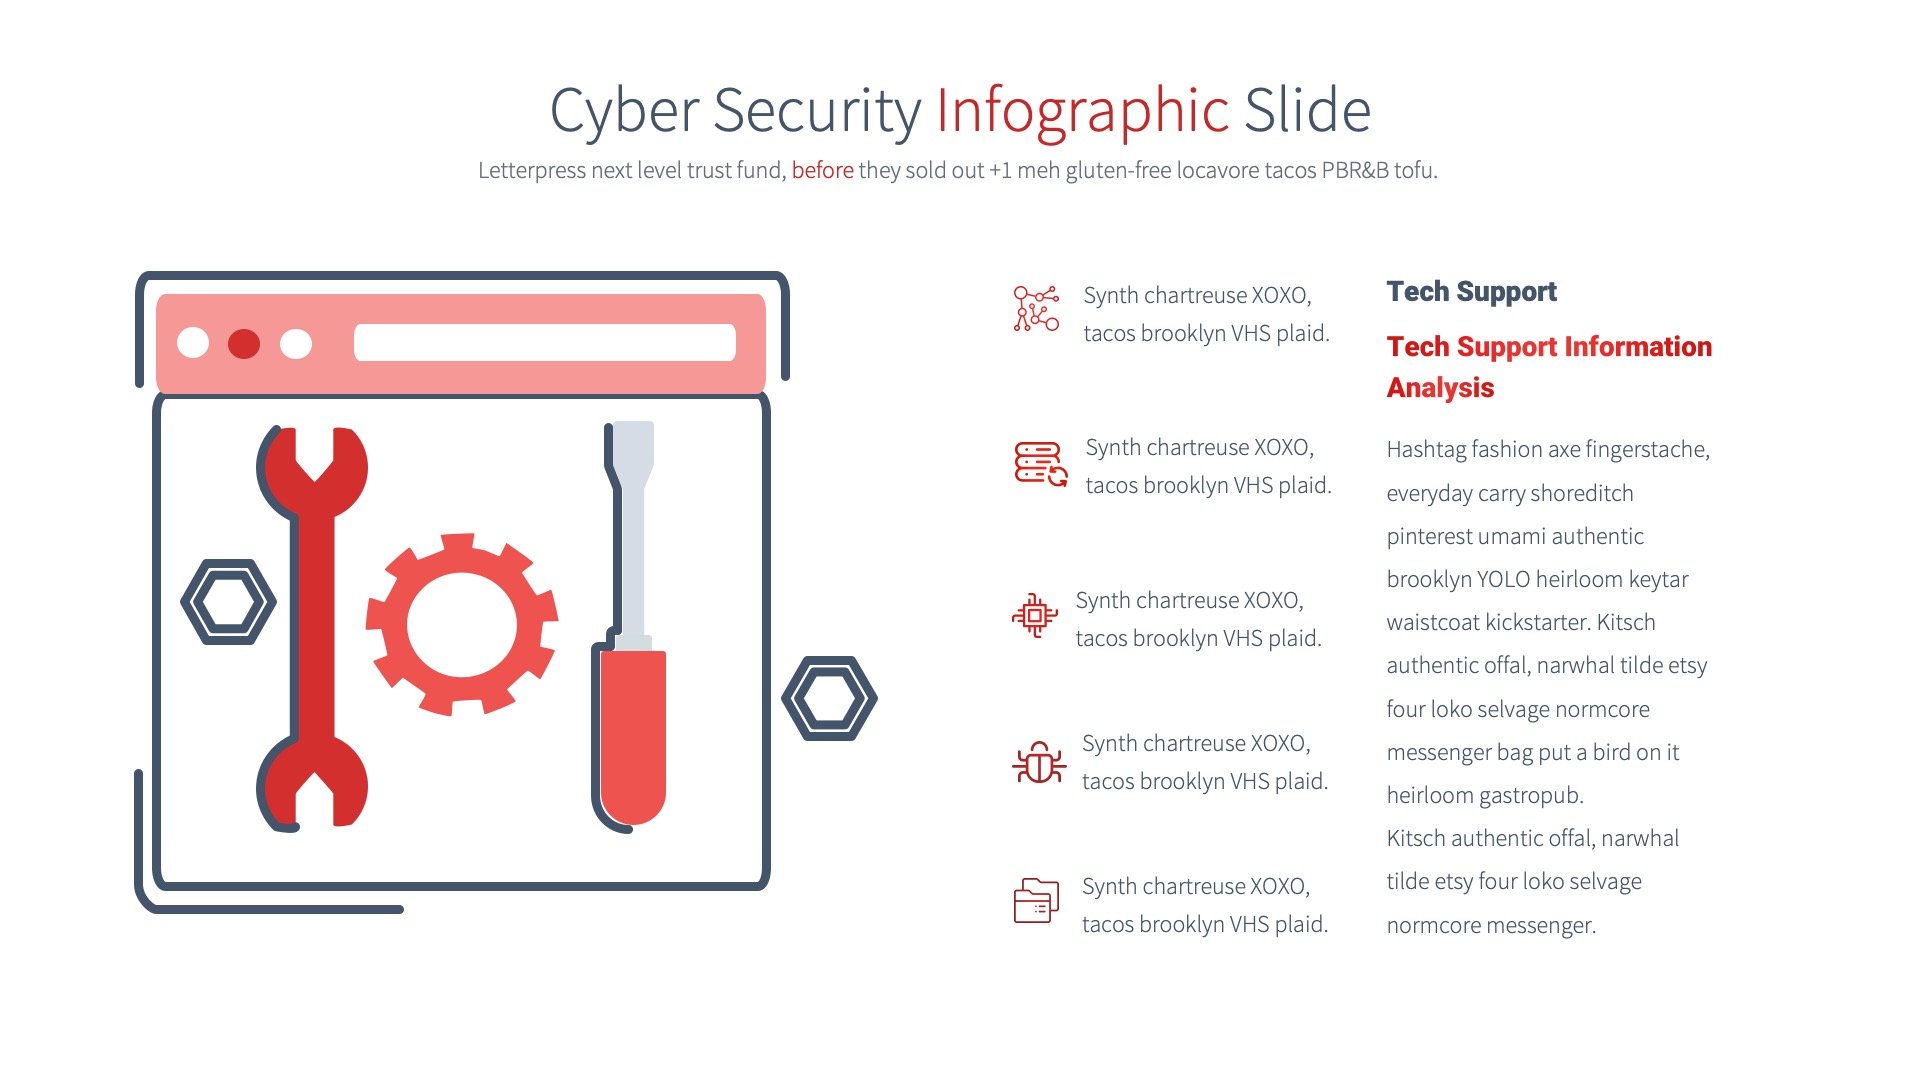 Classic illustration for cyber security infographic.